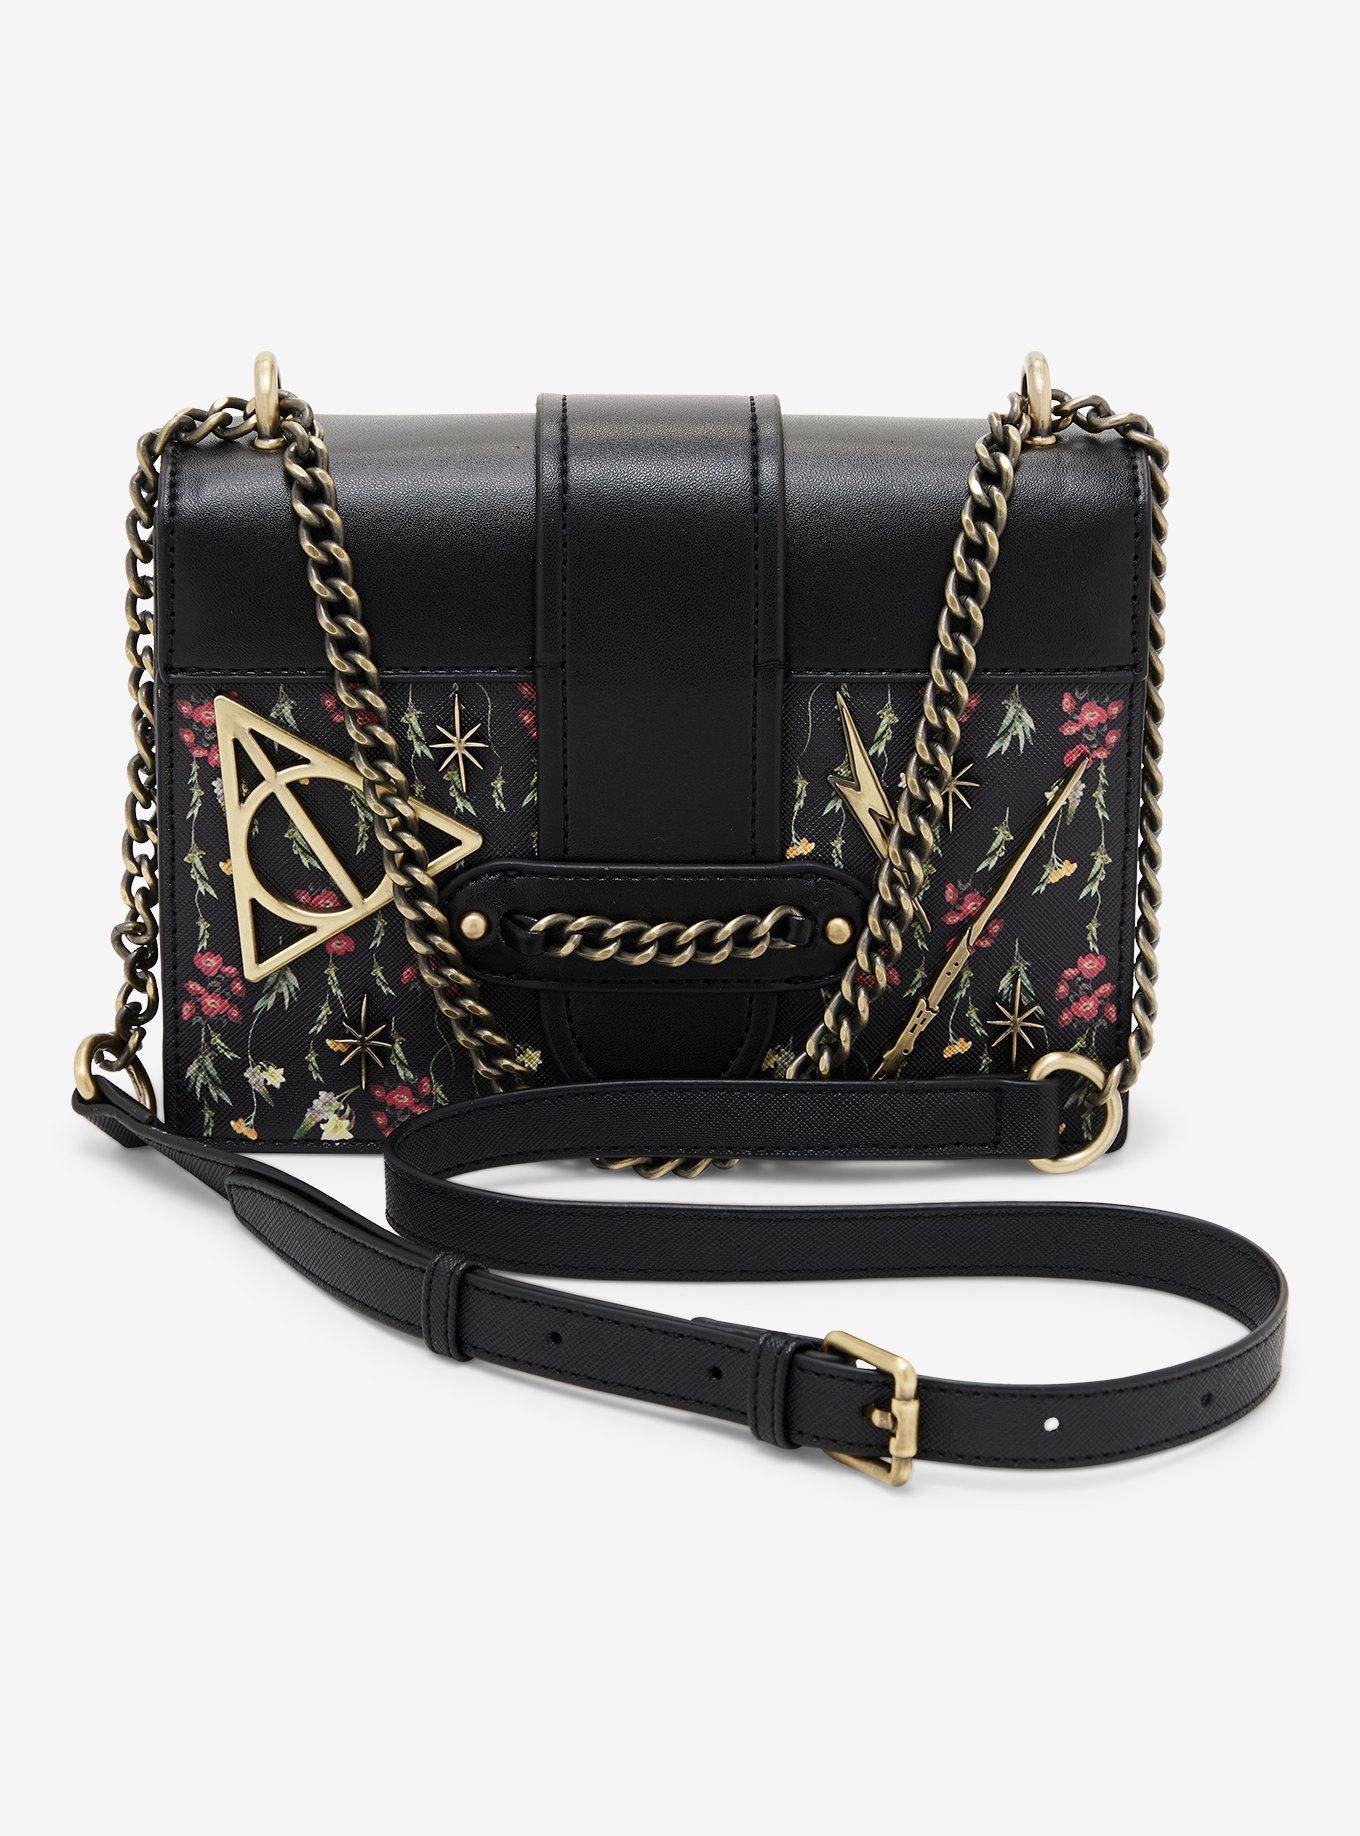 Harry Potter Floral Deathly Hallows Crossbody Bag - BoxLunch Exclusive